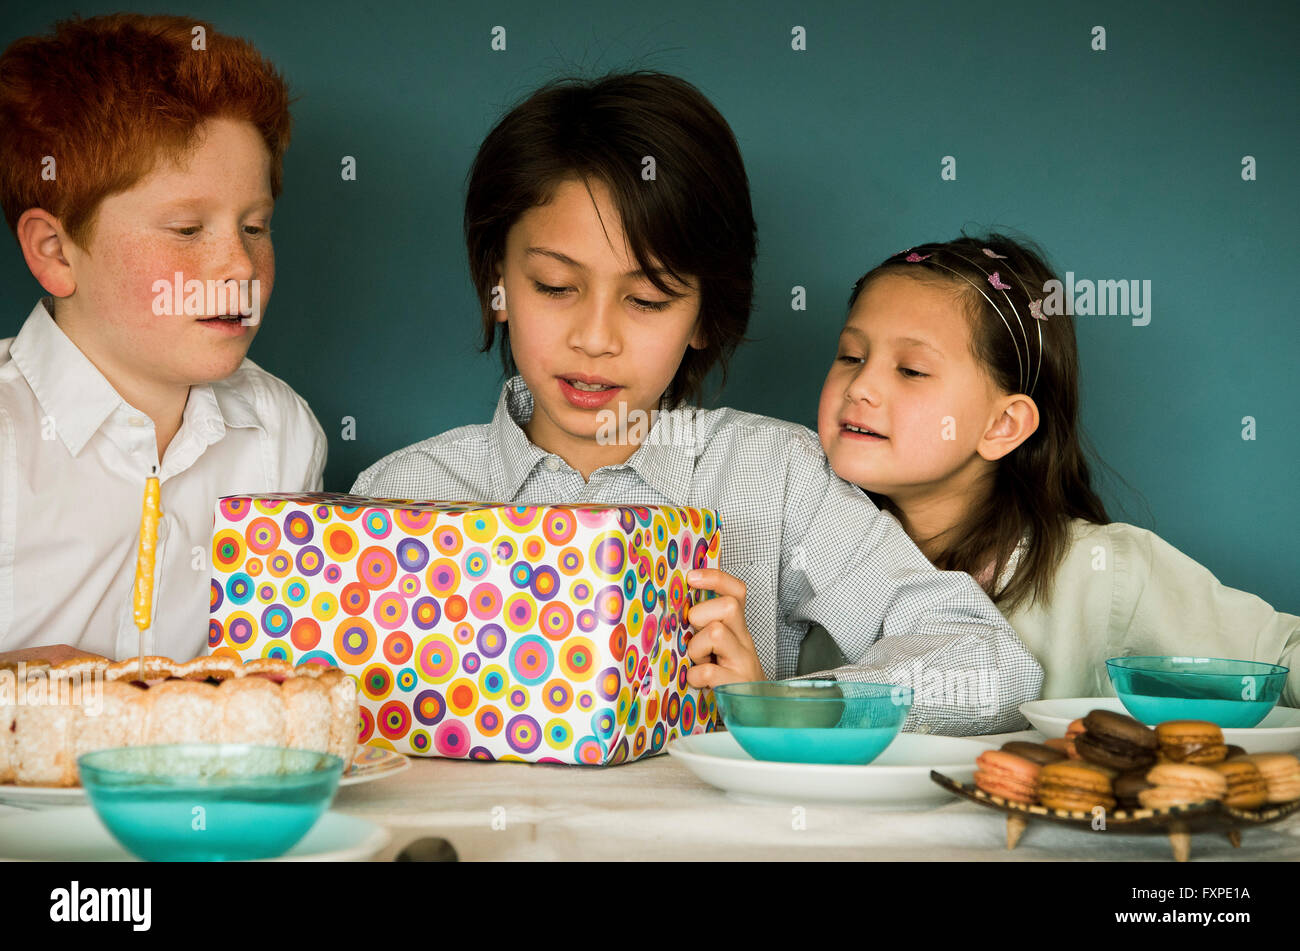 Children looking at wrapped gift at birthday party Stock Photo